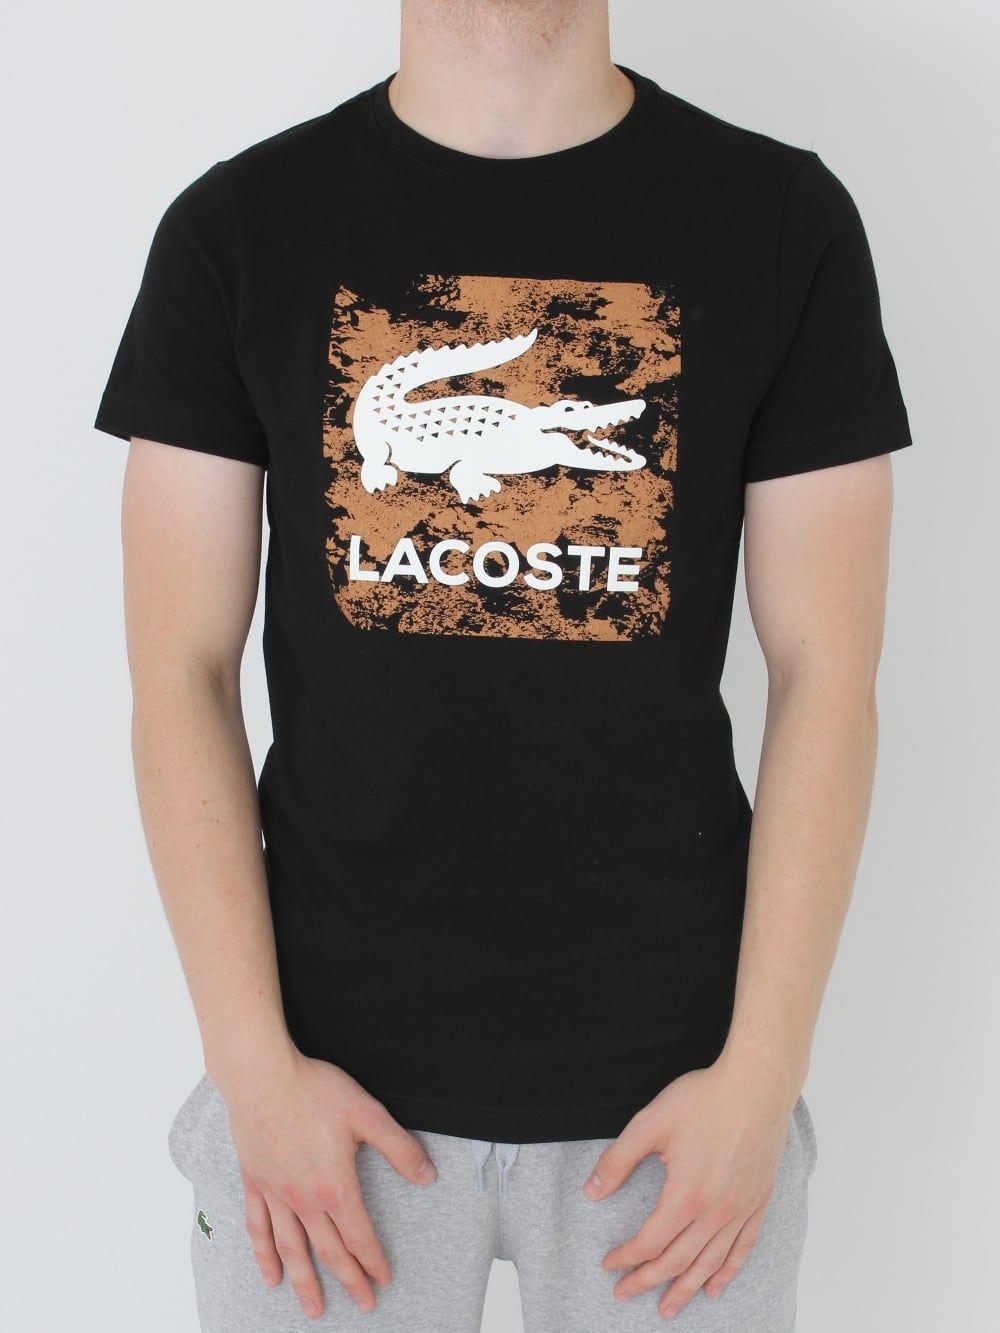 Lacoste Shirt Logo - lacoste Sport Logo T.Shirt in Black - Northern Threads